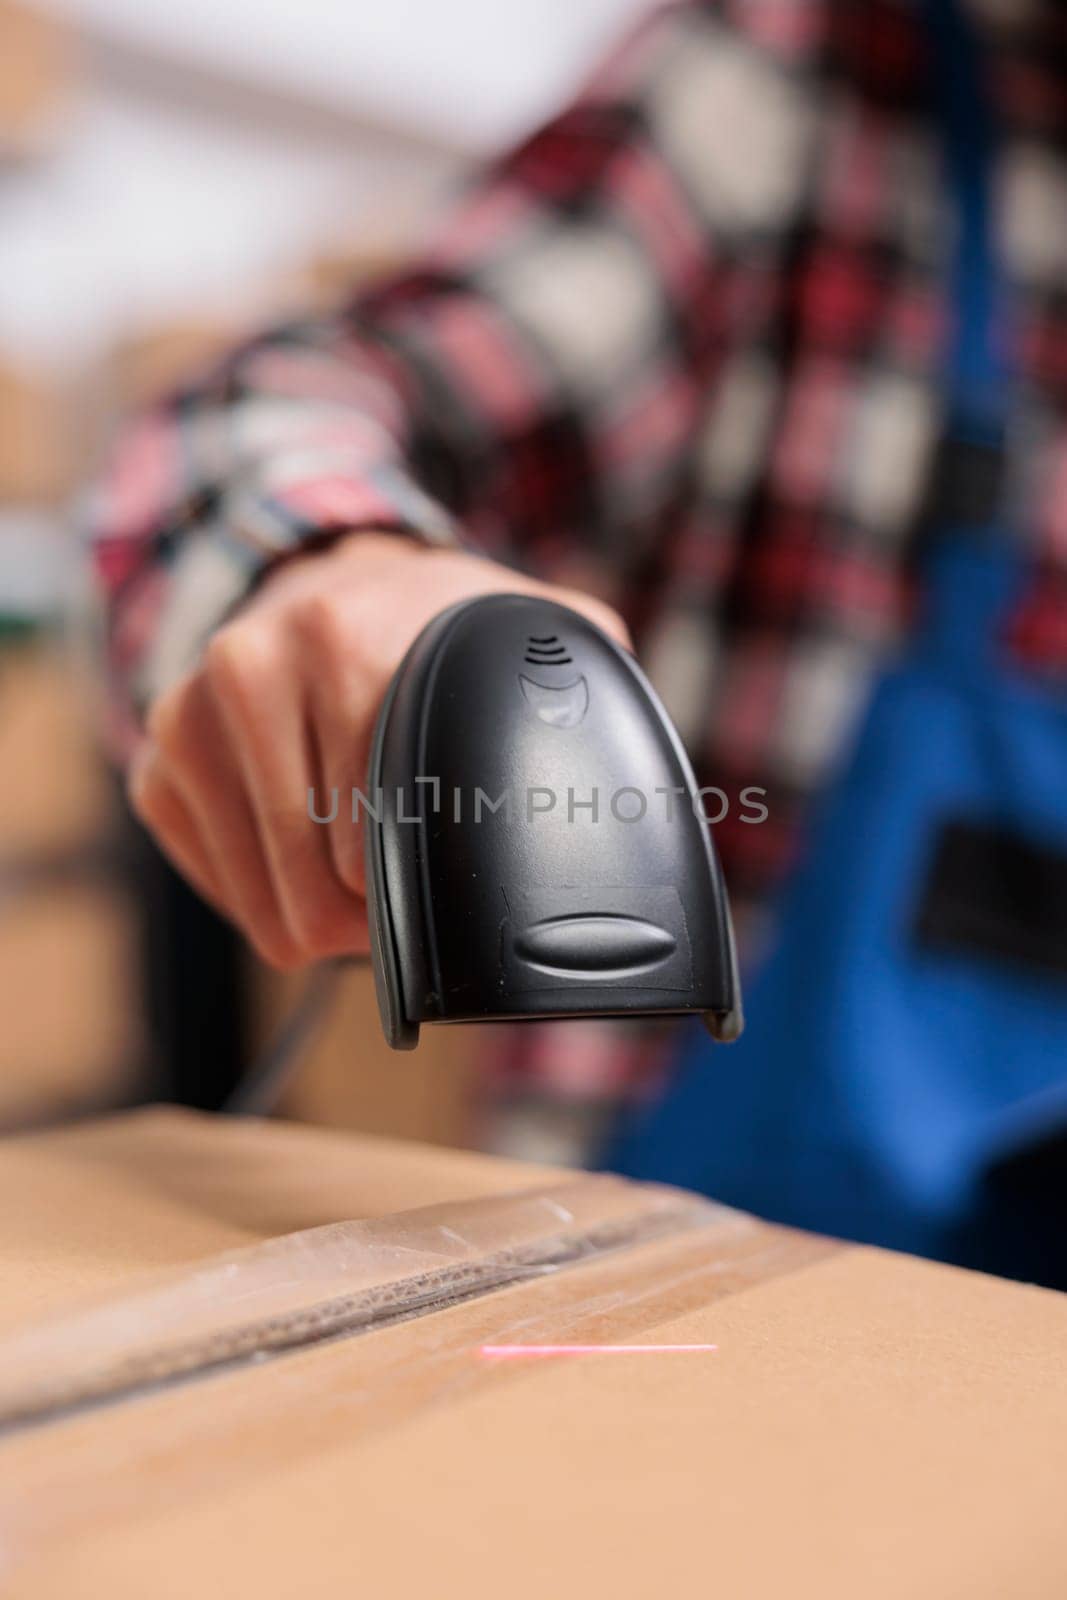 Delivery service employee scanning parcel and managing packages storing in warehouse. Storehouse worker doing shipment operations while holding barcode scanner in hand close up